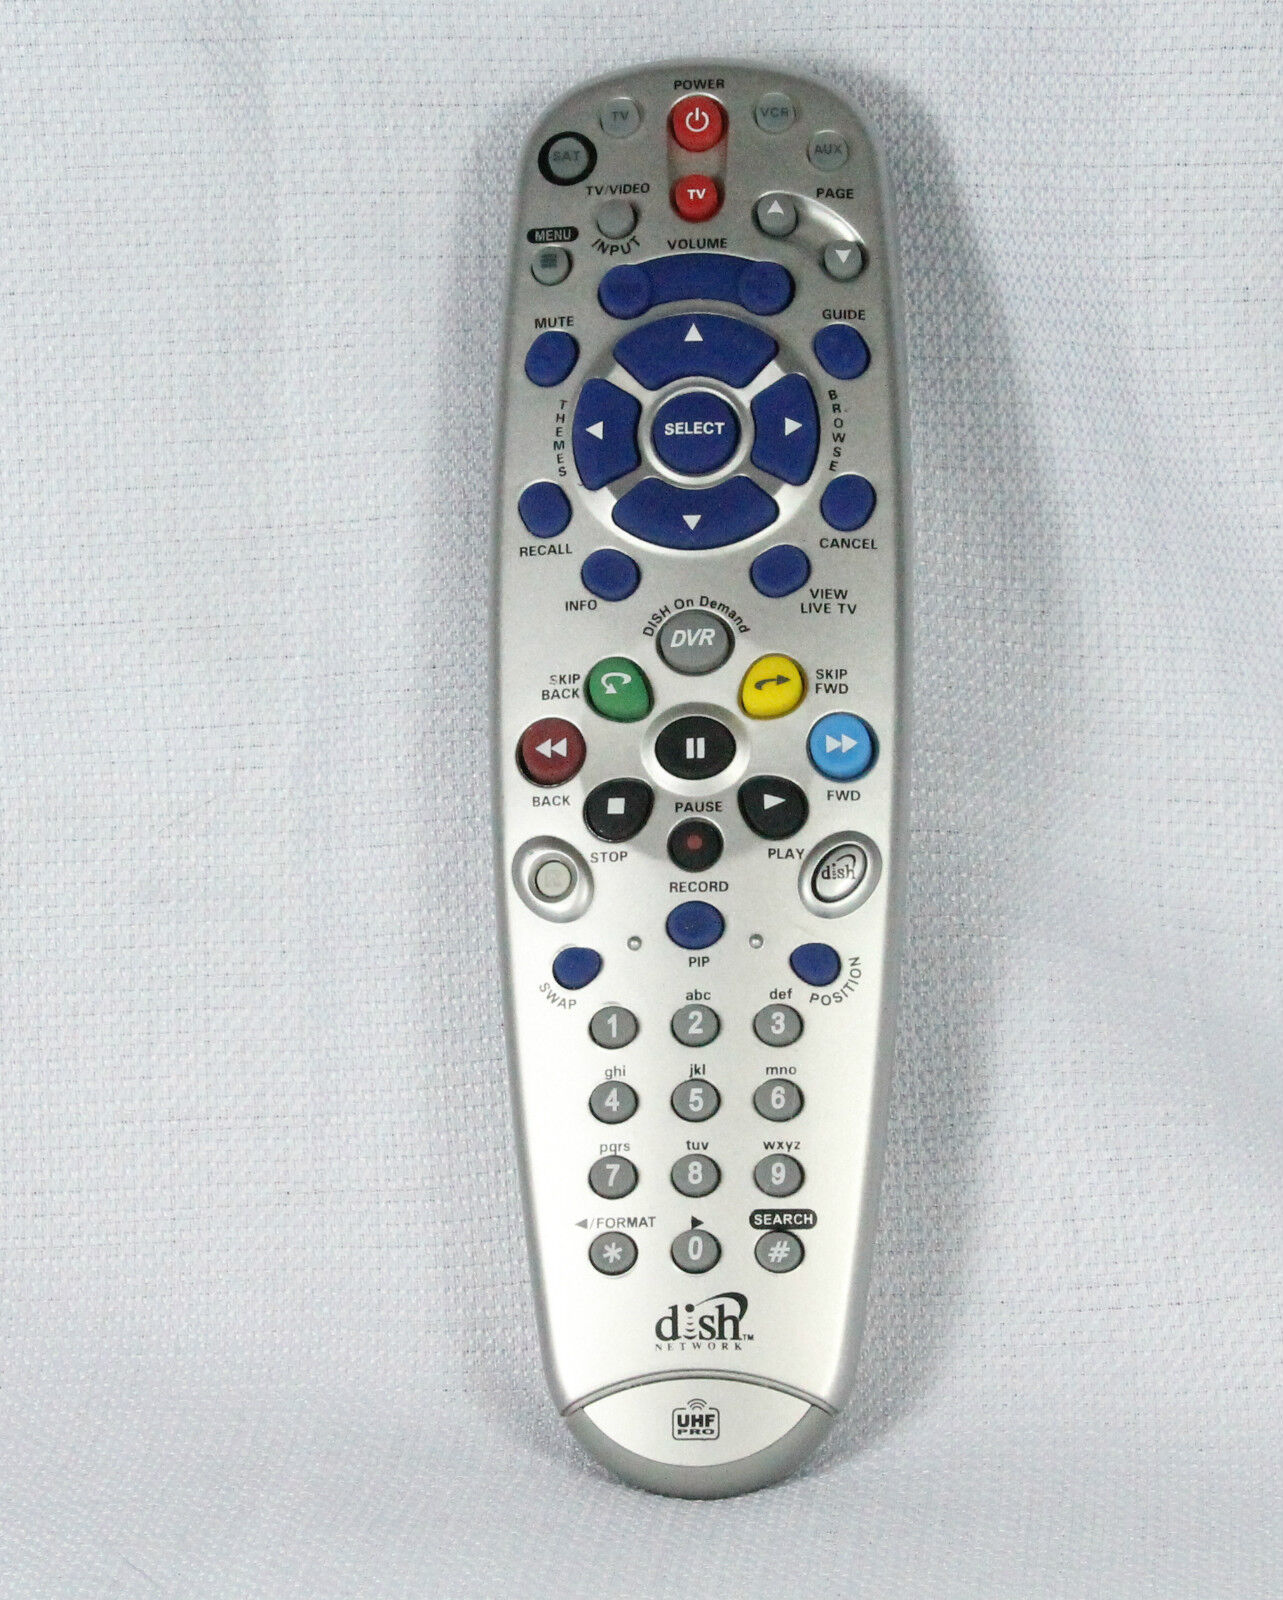 How To Program Dish Network Remote To Tv Sanyo